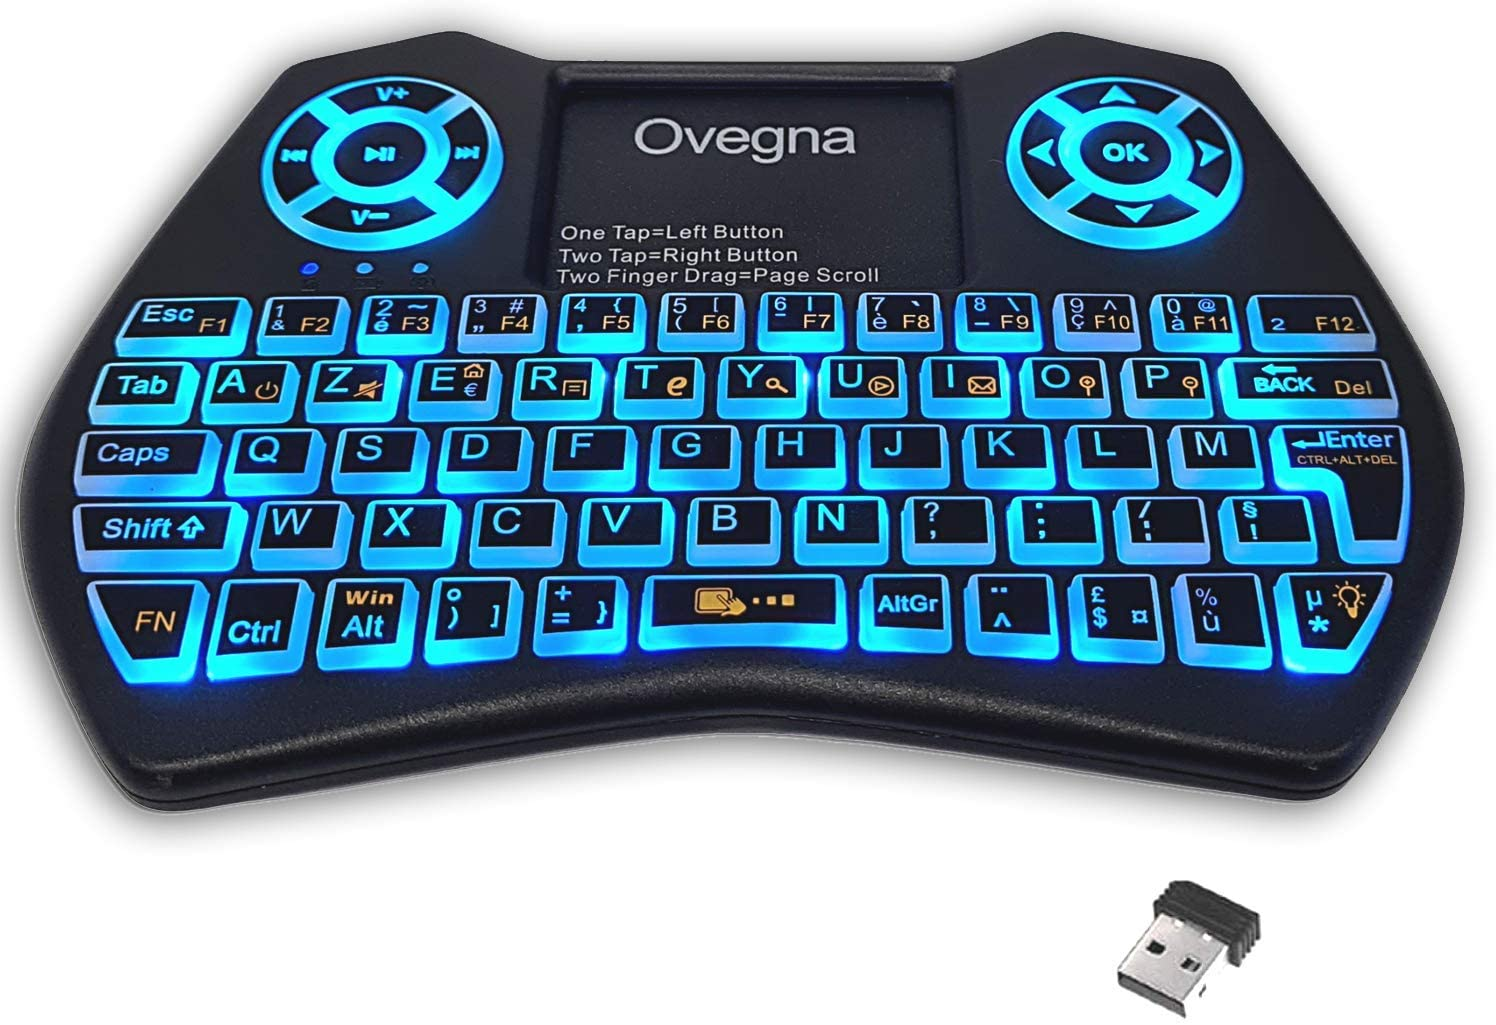 ovegna-q9-azerty-mini-2-4ghz-wireless-keyboard-wireless-with-touchpad-led-backlit-rgb-for-smart-tv-pc-mini-pc-raspberry-pi-2-3-consoles-laptop-pc-and-android-box--5